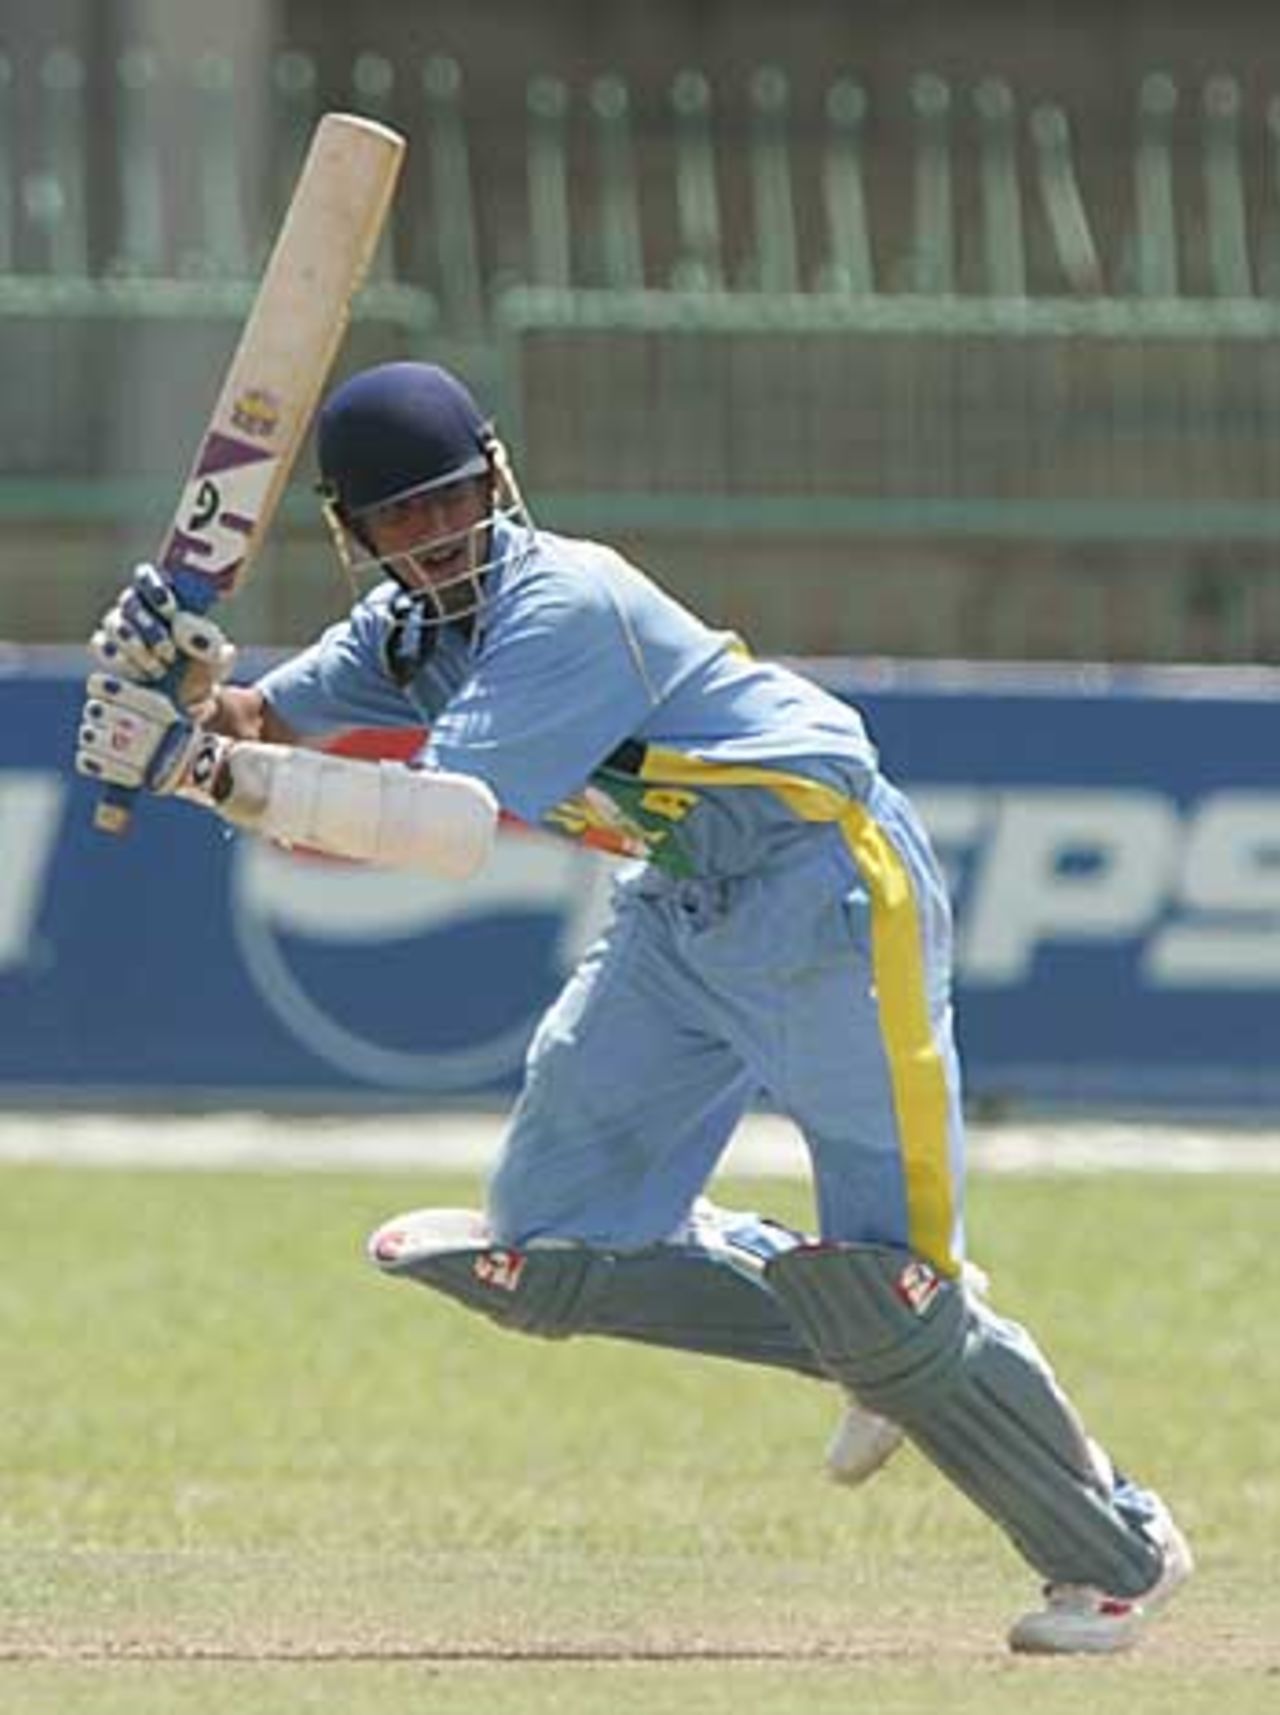 Cheteshwar Pujara clips one fine during his knock of 97, India U-19s v West Indies U-19s, Colombo, February 11, 2006